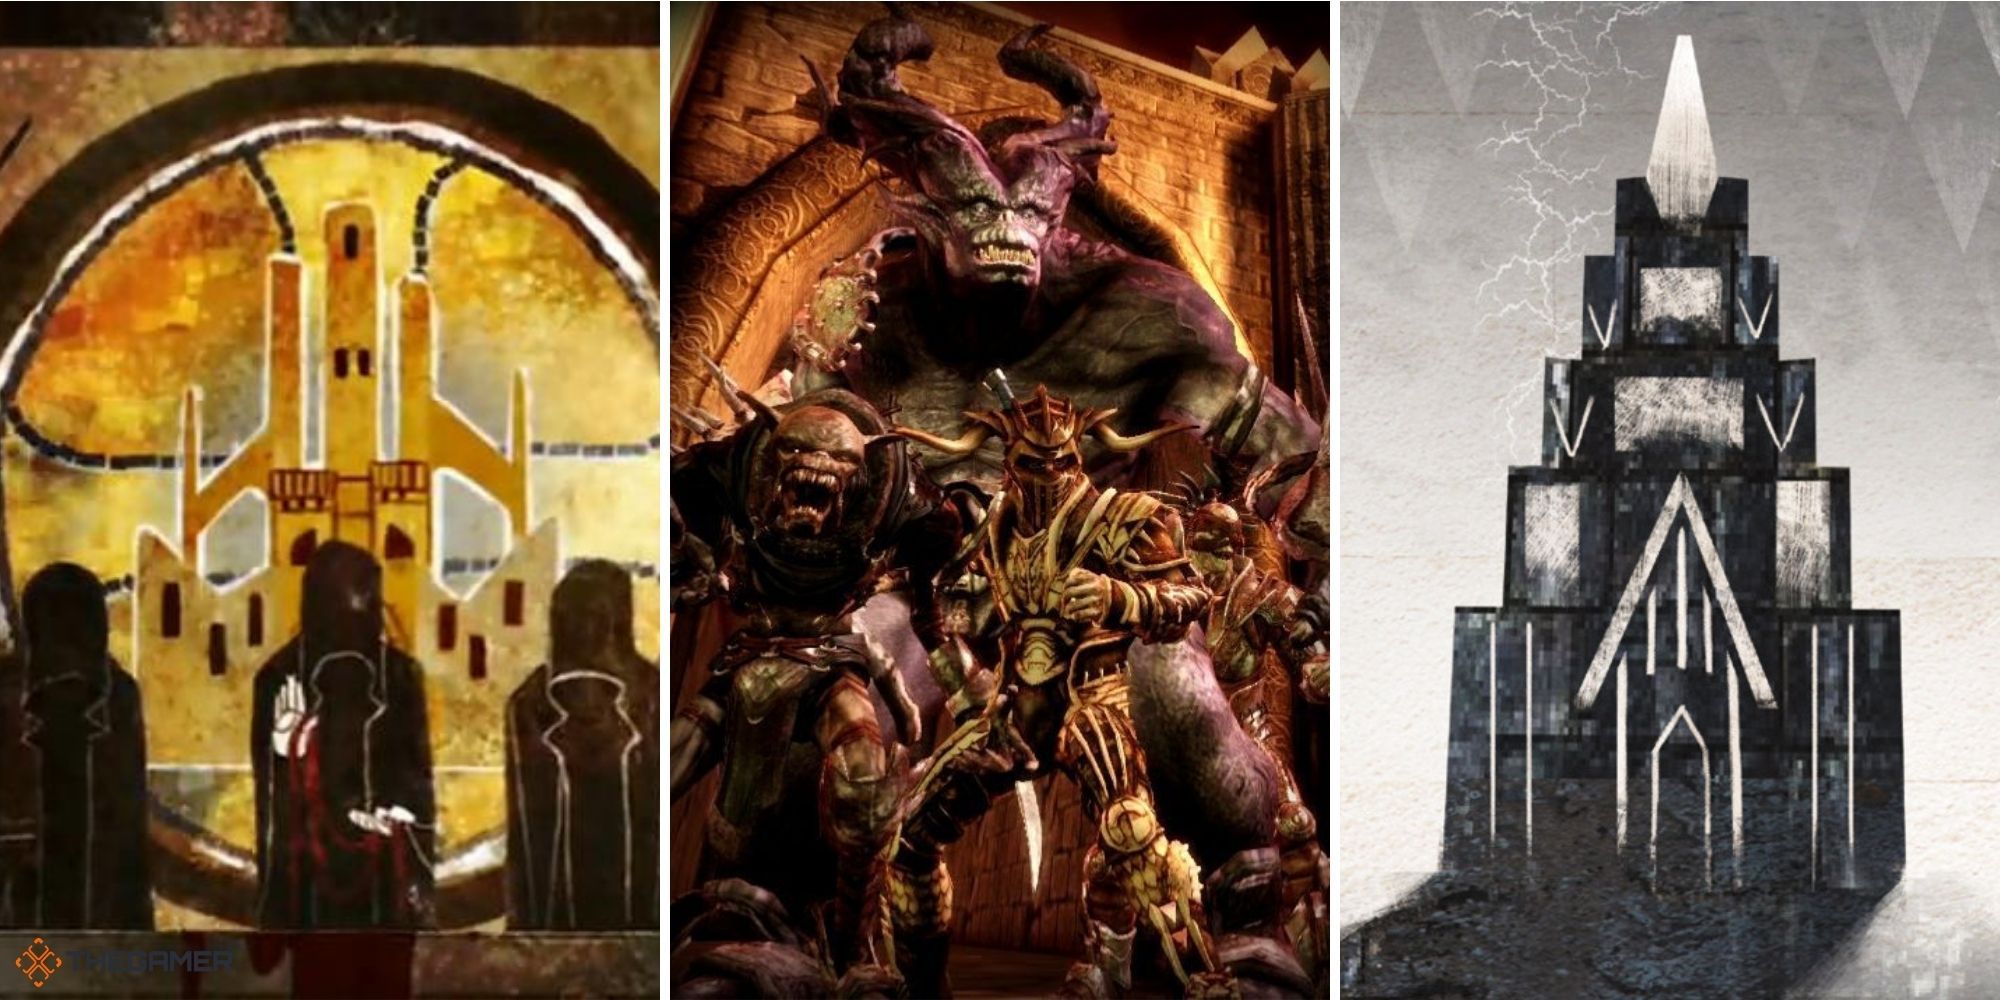 Dragon Age - Darkspawn in centre, art of the Magisterium on left, Art of the Golden City and the Magisters on left